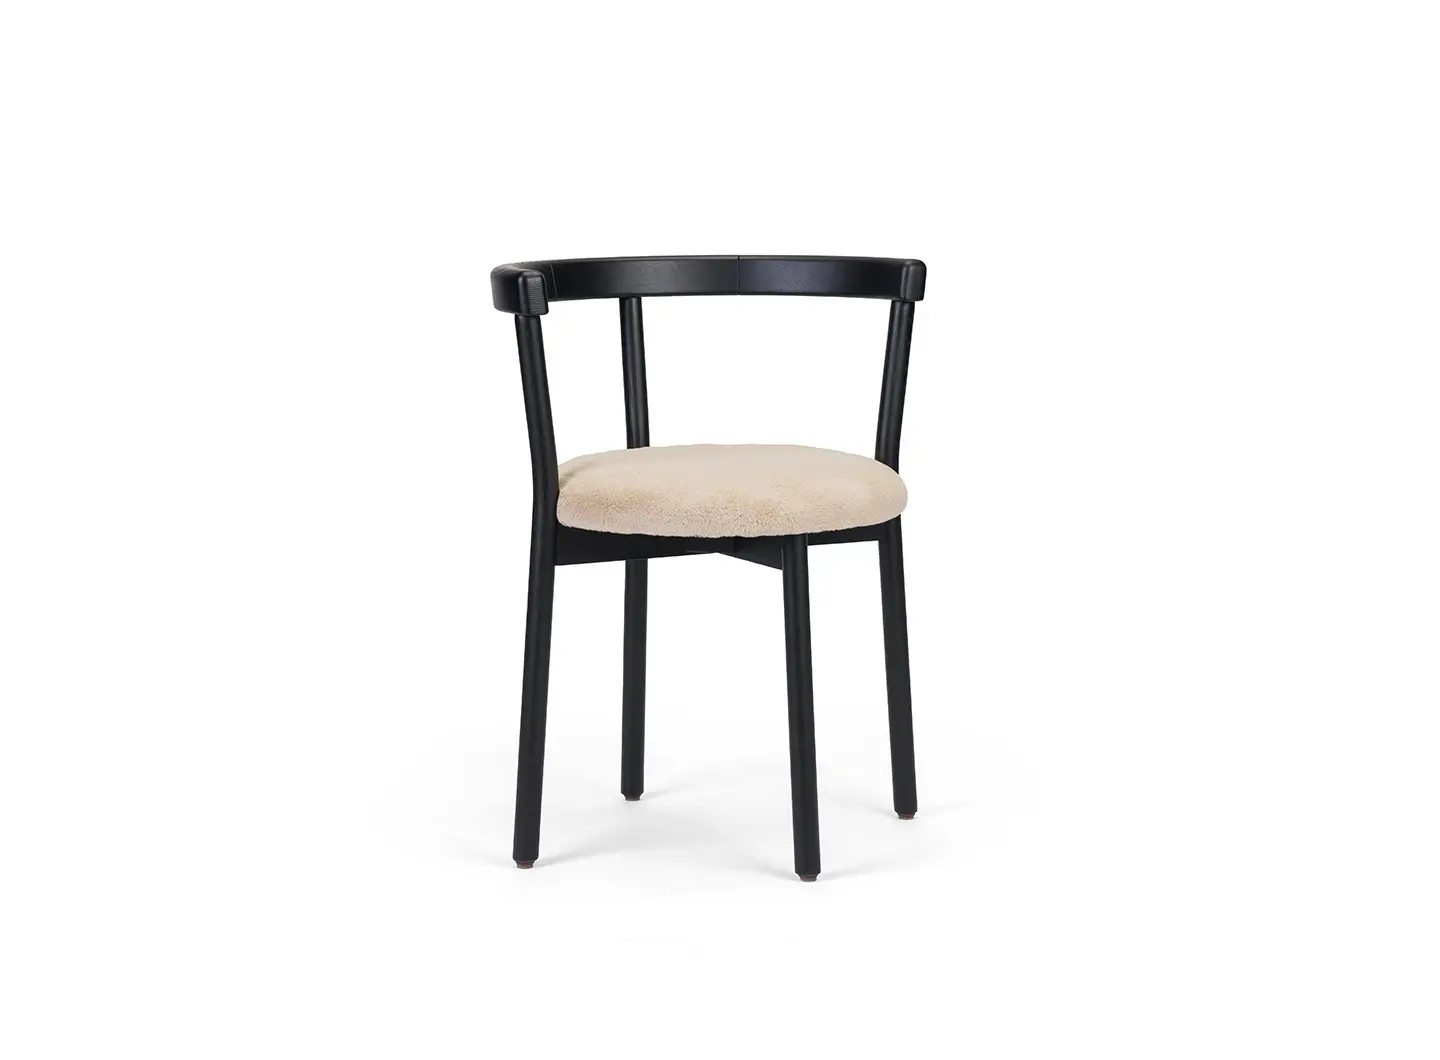 Twist Dining Chair by Studio Segers